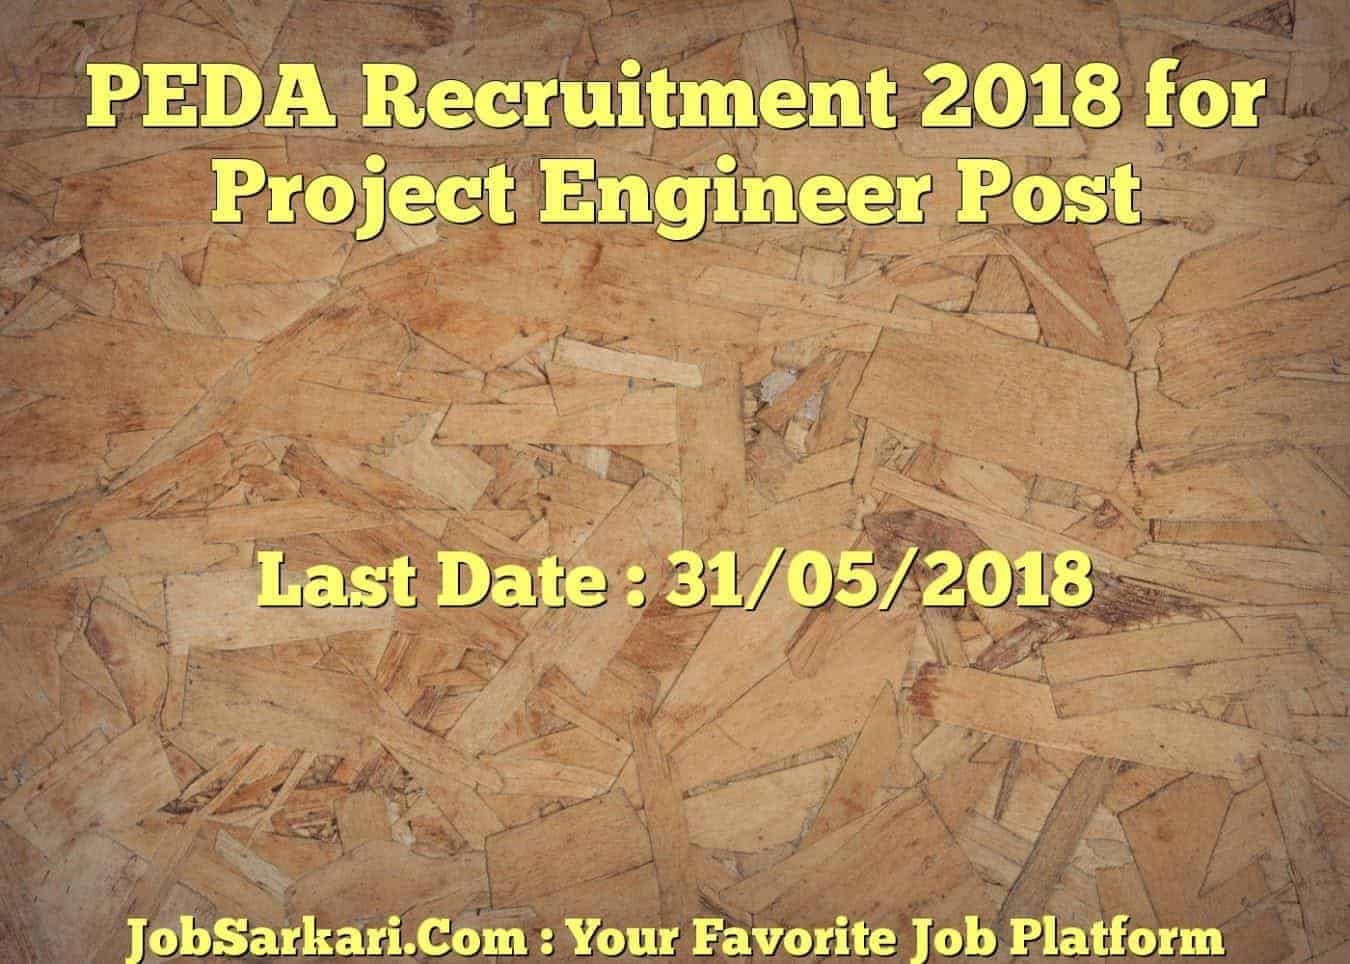 PEDA Recruitment 2018 for Project Engineer Post